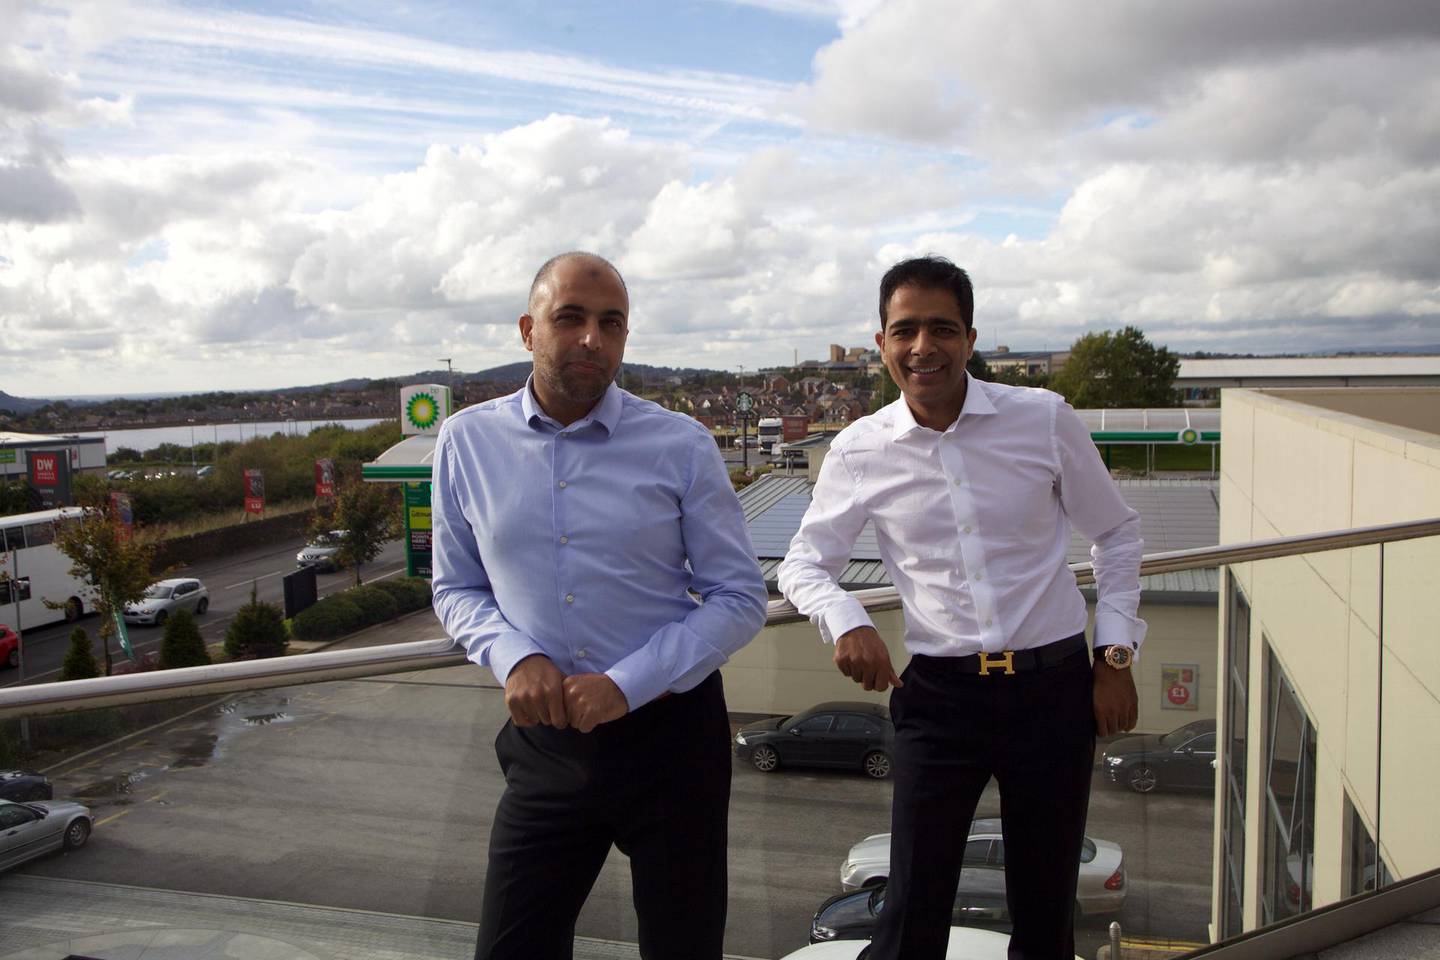 The UK competition regulator has set an April 20 deadline for a decision on the acquisition of Asda by billionaire brothers Mohsin and Zuber Issa. Courtesy Euro Garages